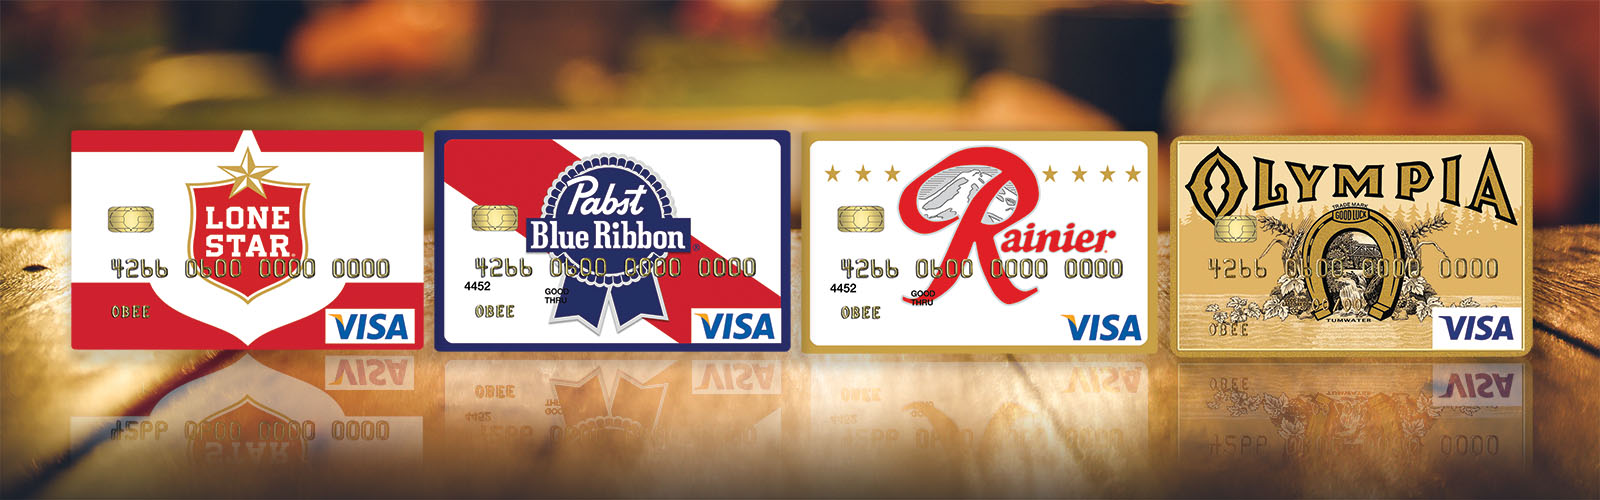 Pabst Blue Ribbon family Credit Cards